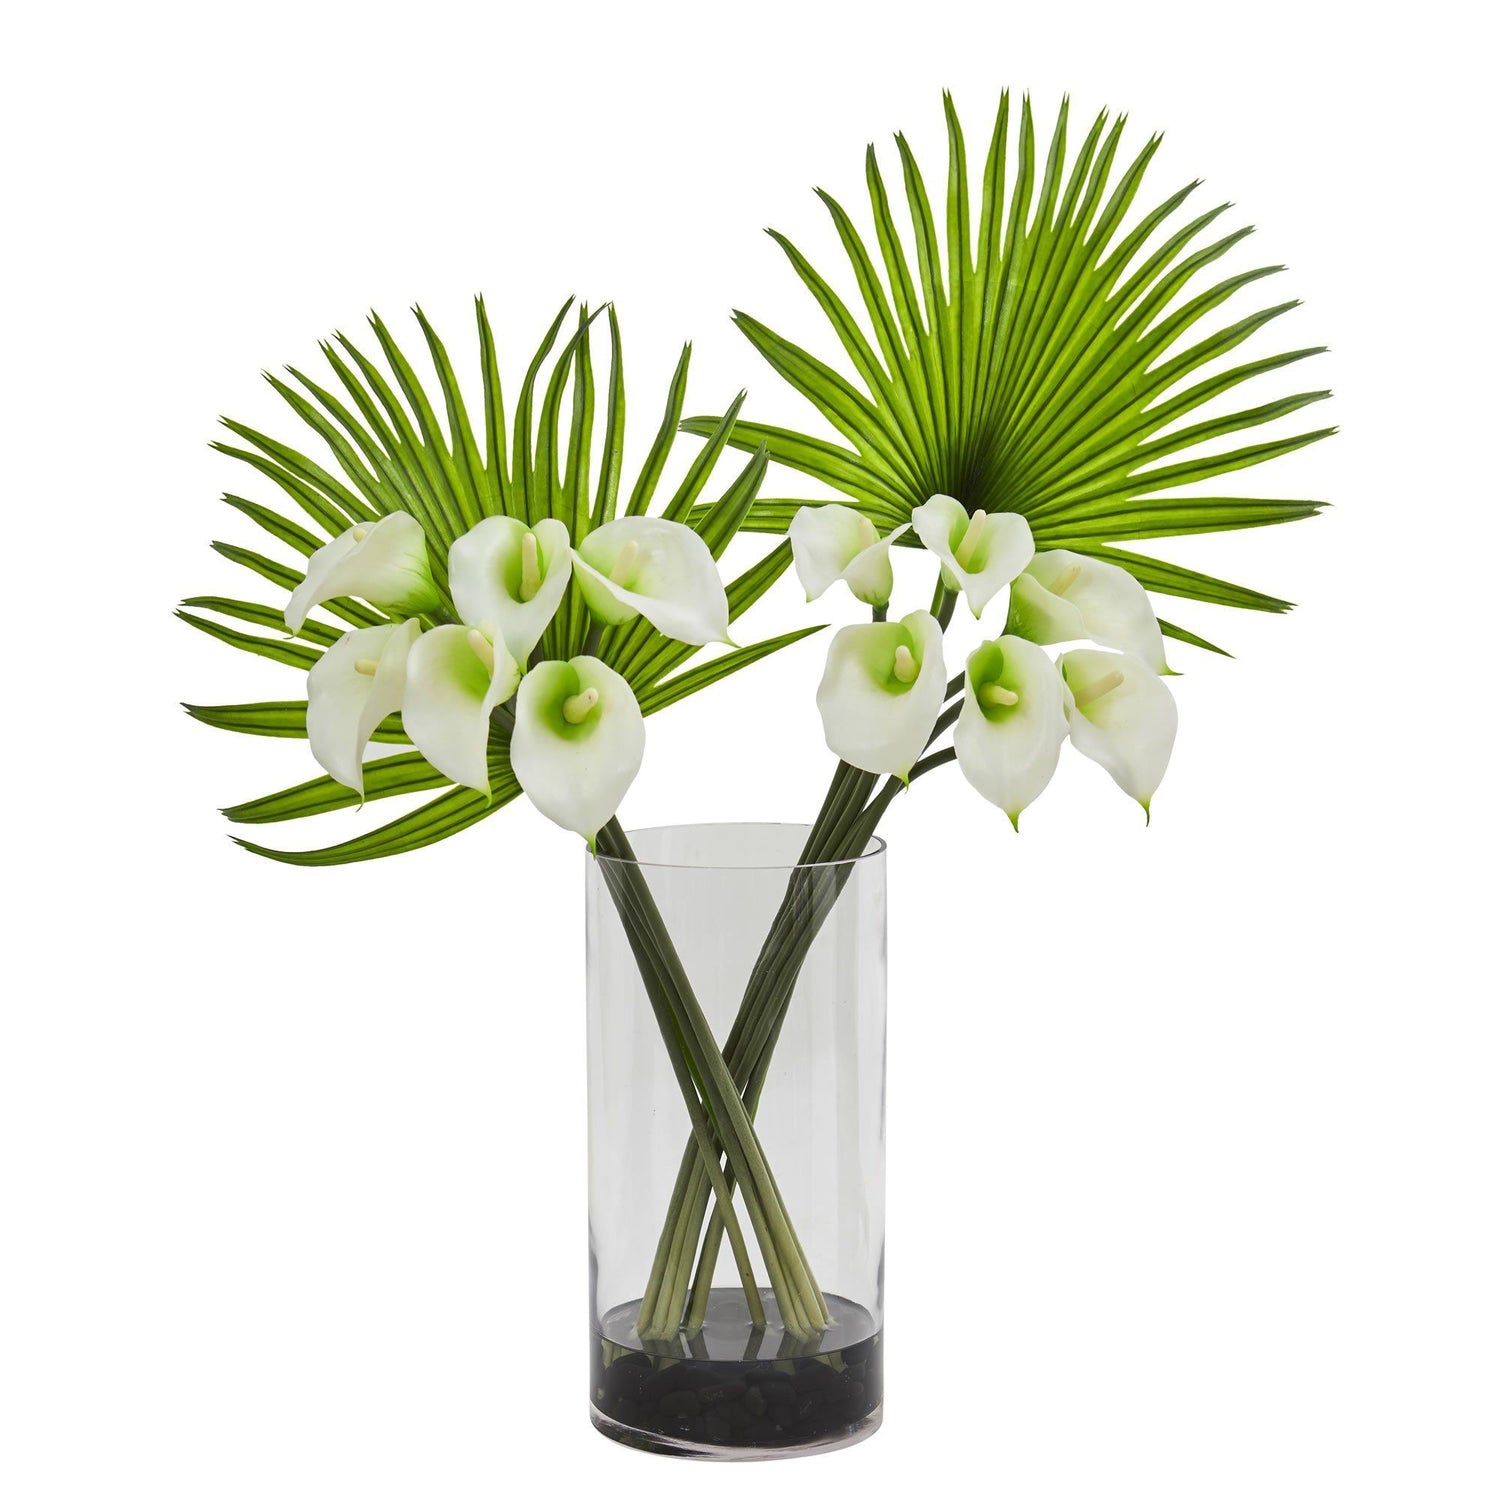 Calla Lily and Fan Palm Artificial Arrangement in Cylinder Glass